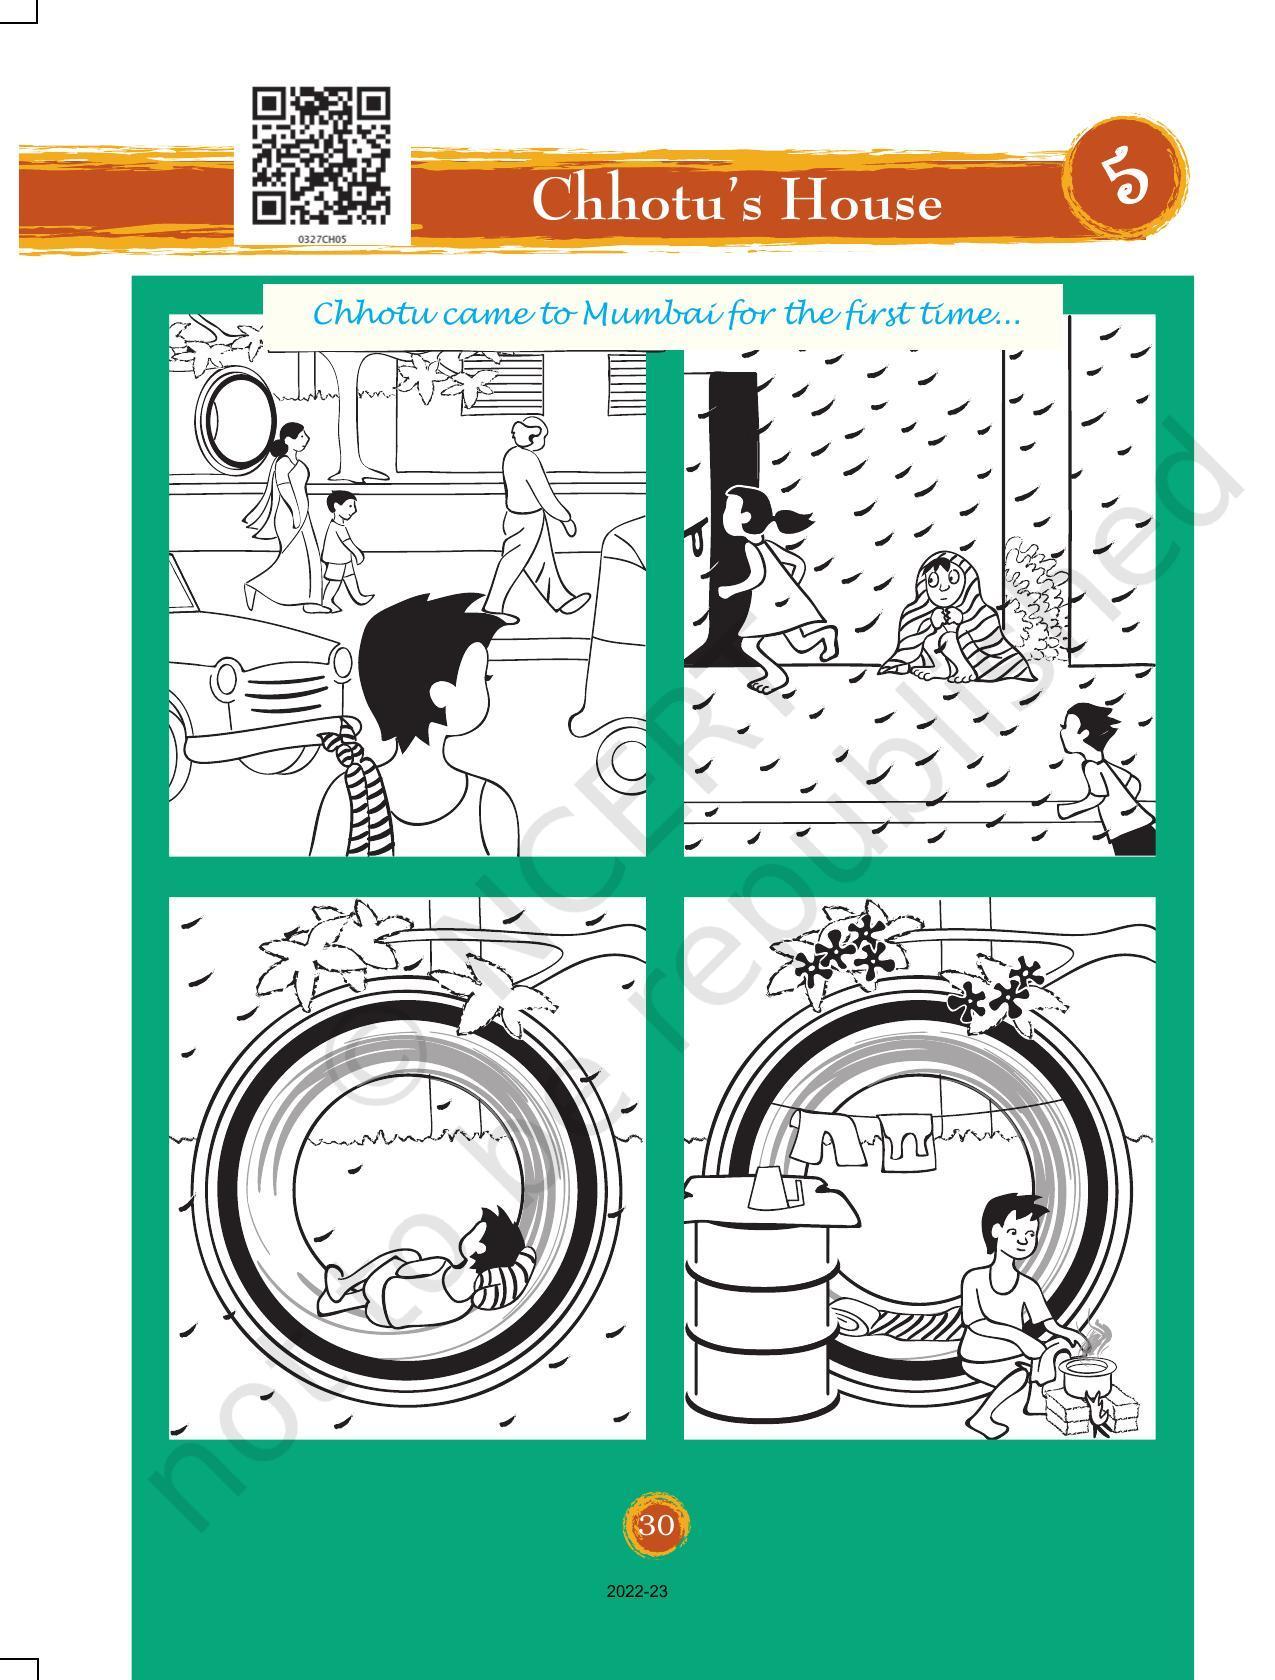 NCERT Book for Class 3 EVS Chapter 5-Chhotu’s House - Page 1